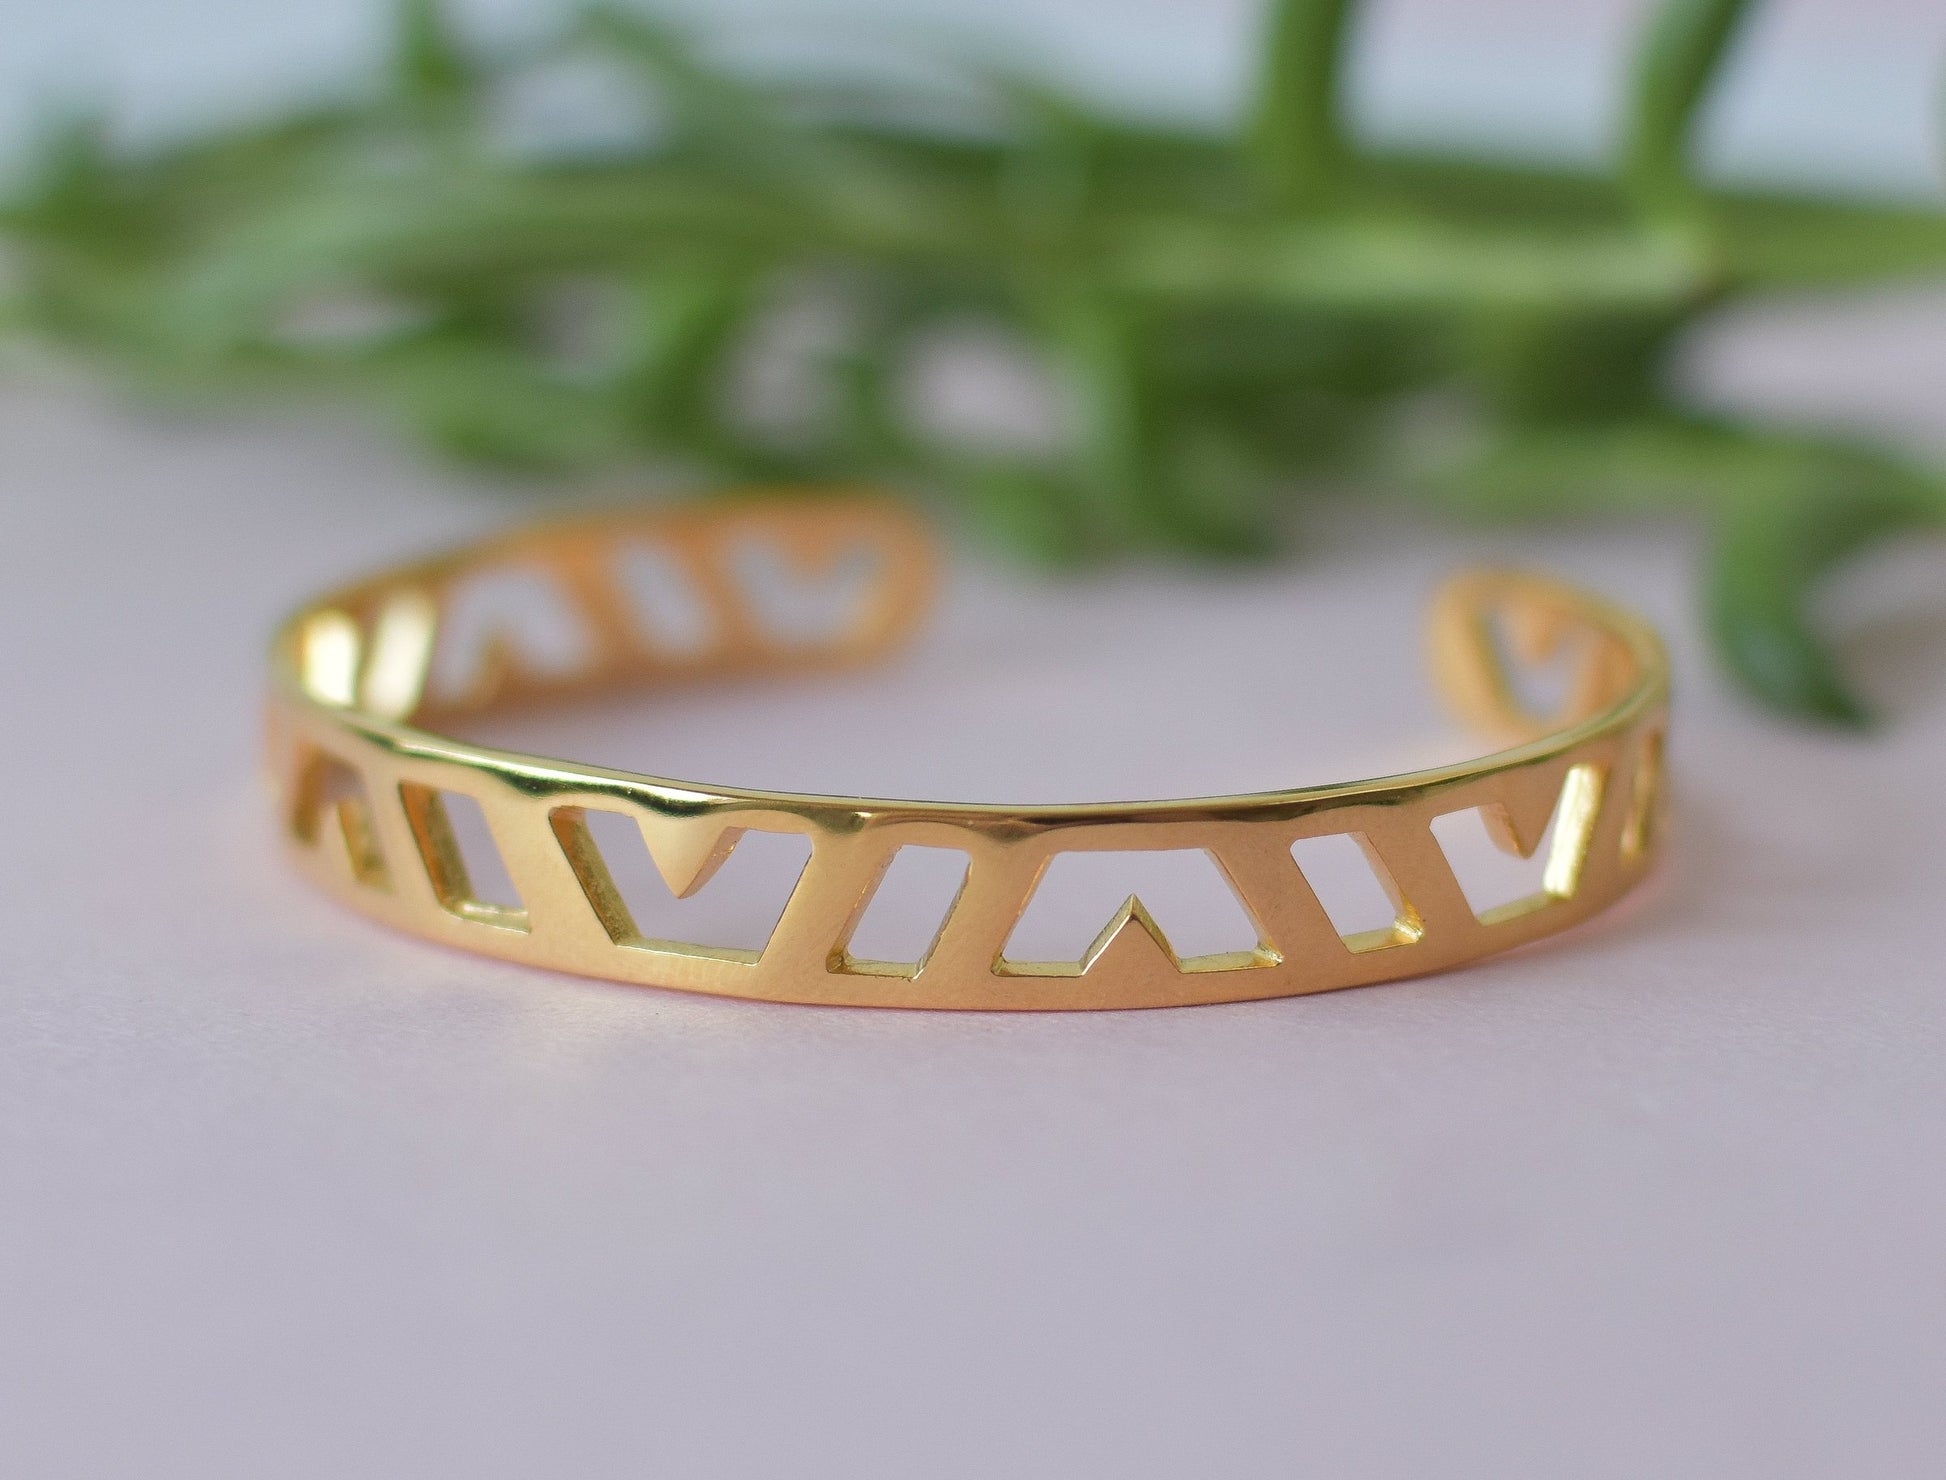 A close up shot off a gold cuff bracelet with geometric pattern and greenery in the background